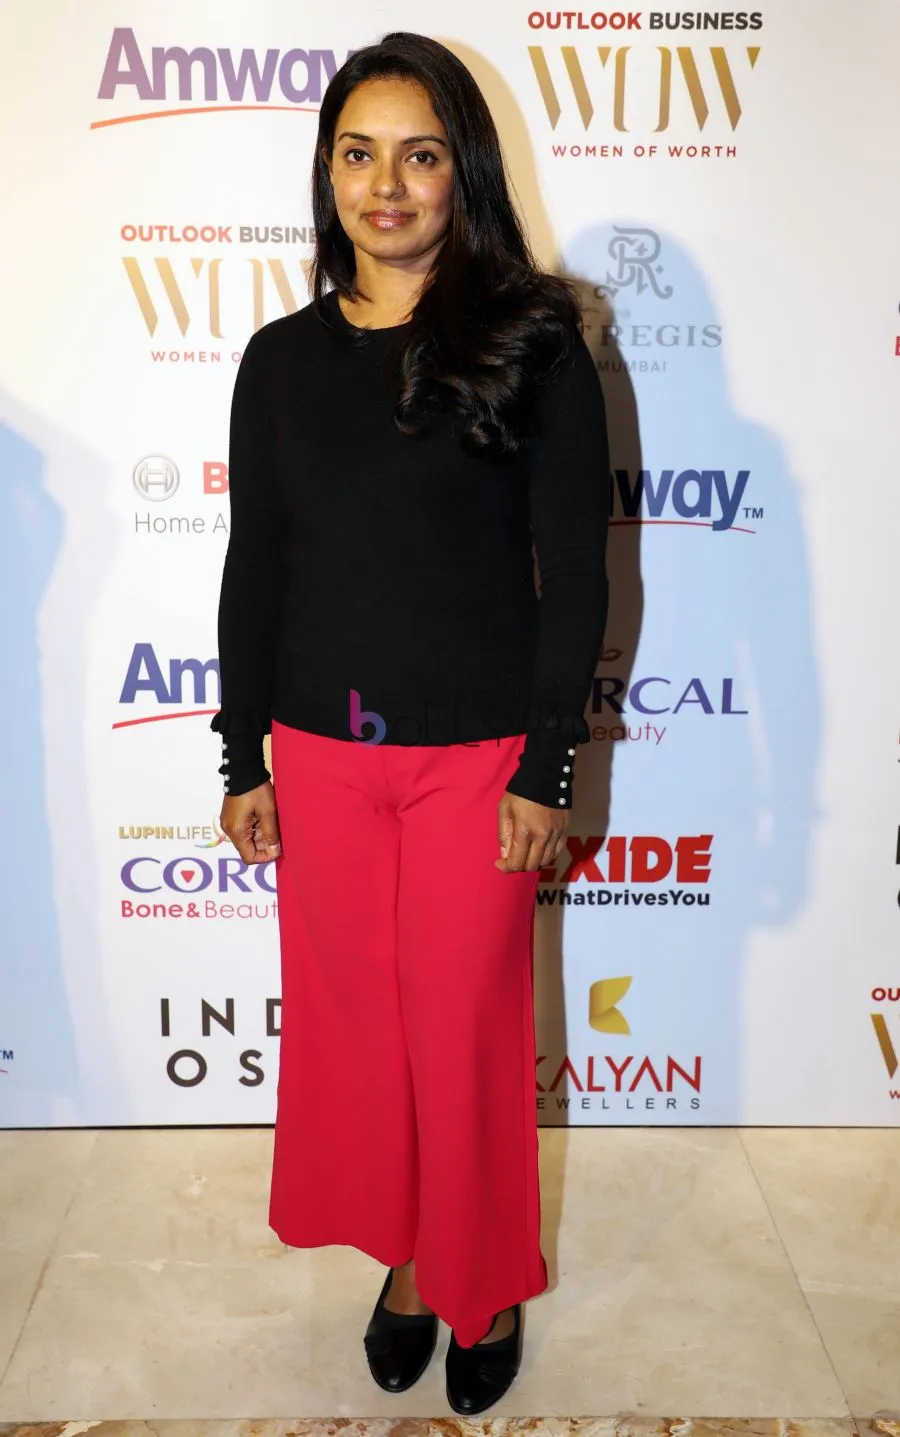 Guests at the Outlook Business 'Women of Worth Awards 2019